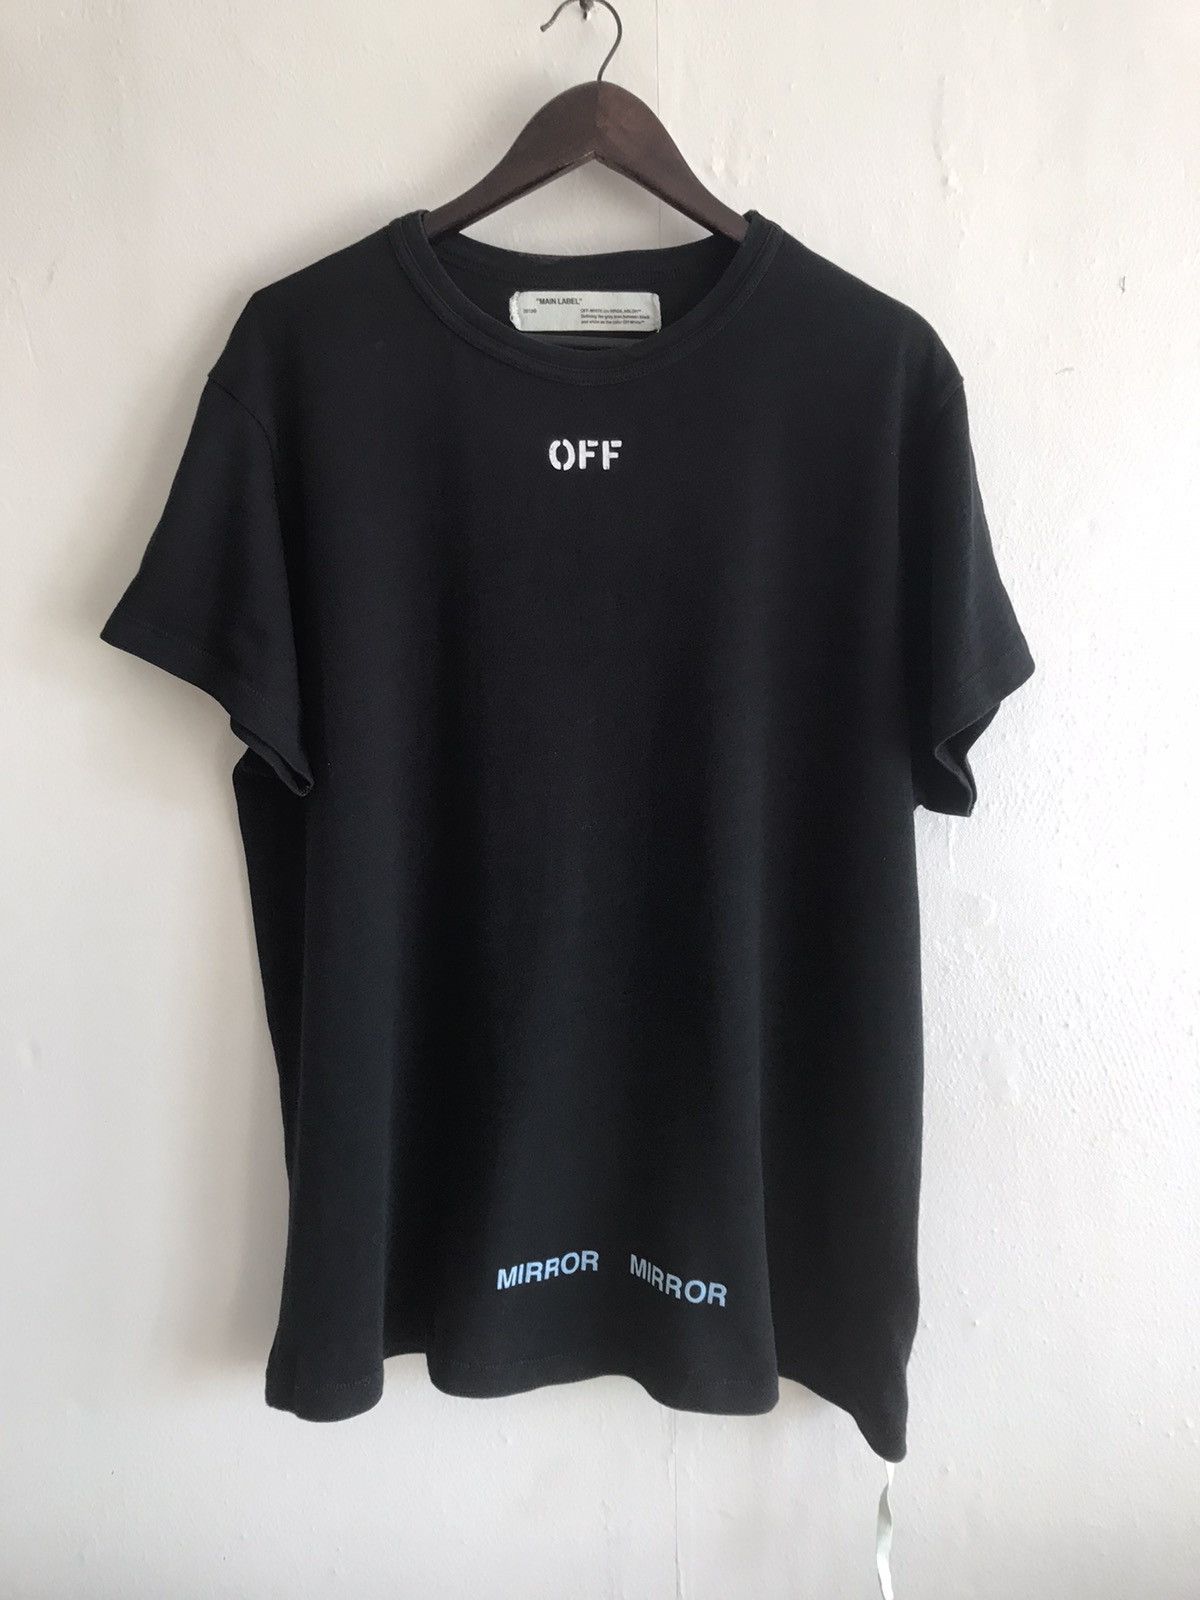 Off-White Off-White Oversized Care Of Tee Mirror T-shirt SS17 Shirt |  Grailed